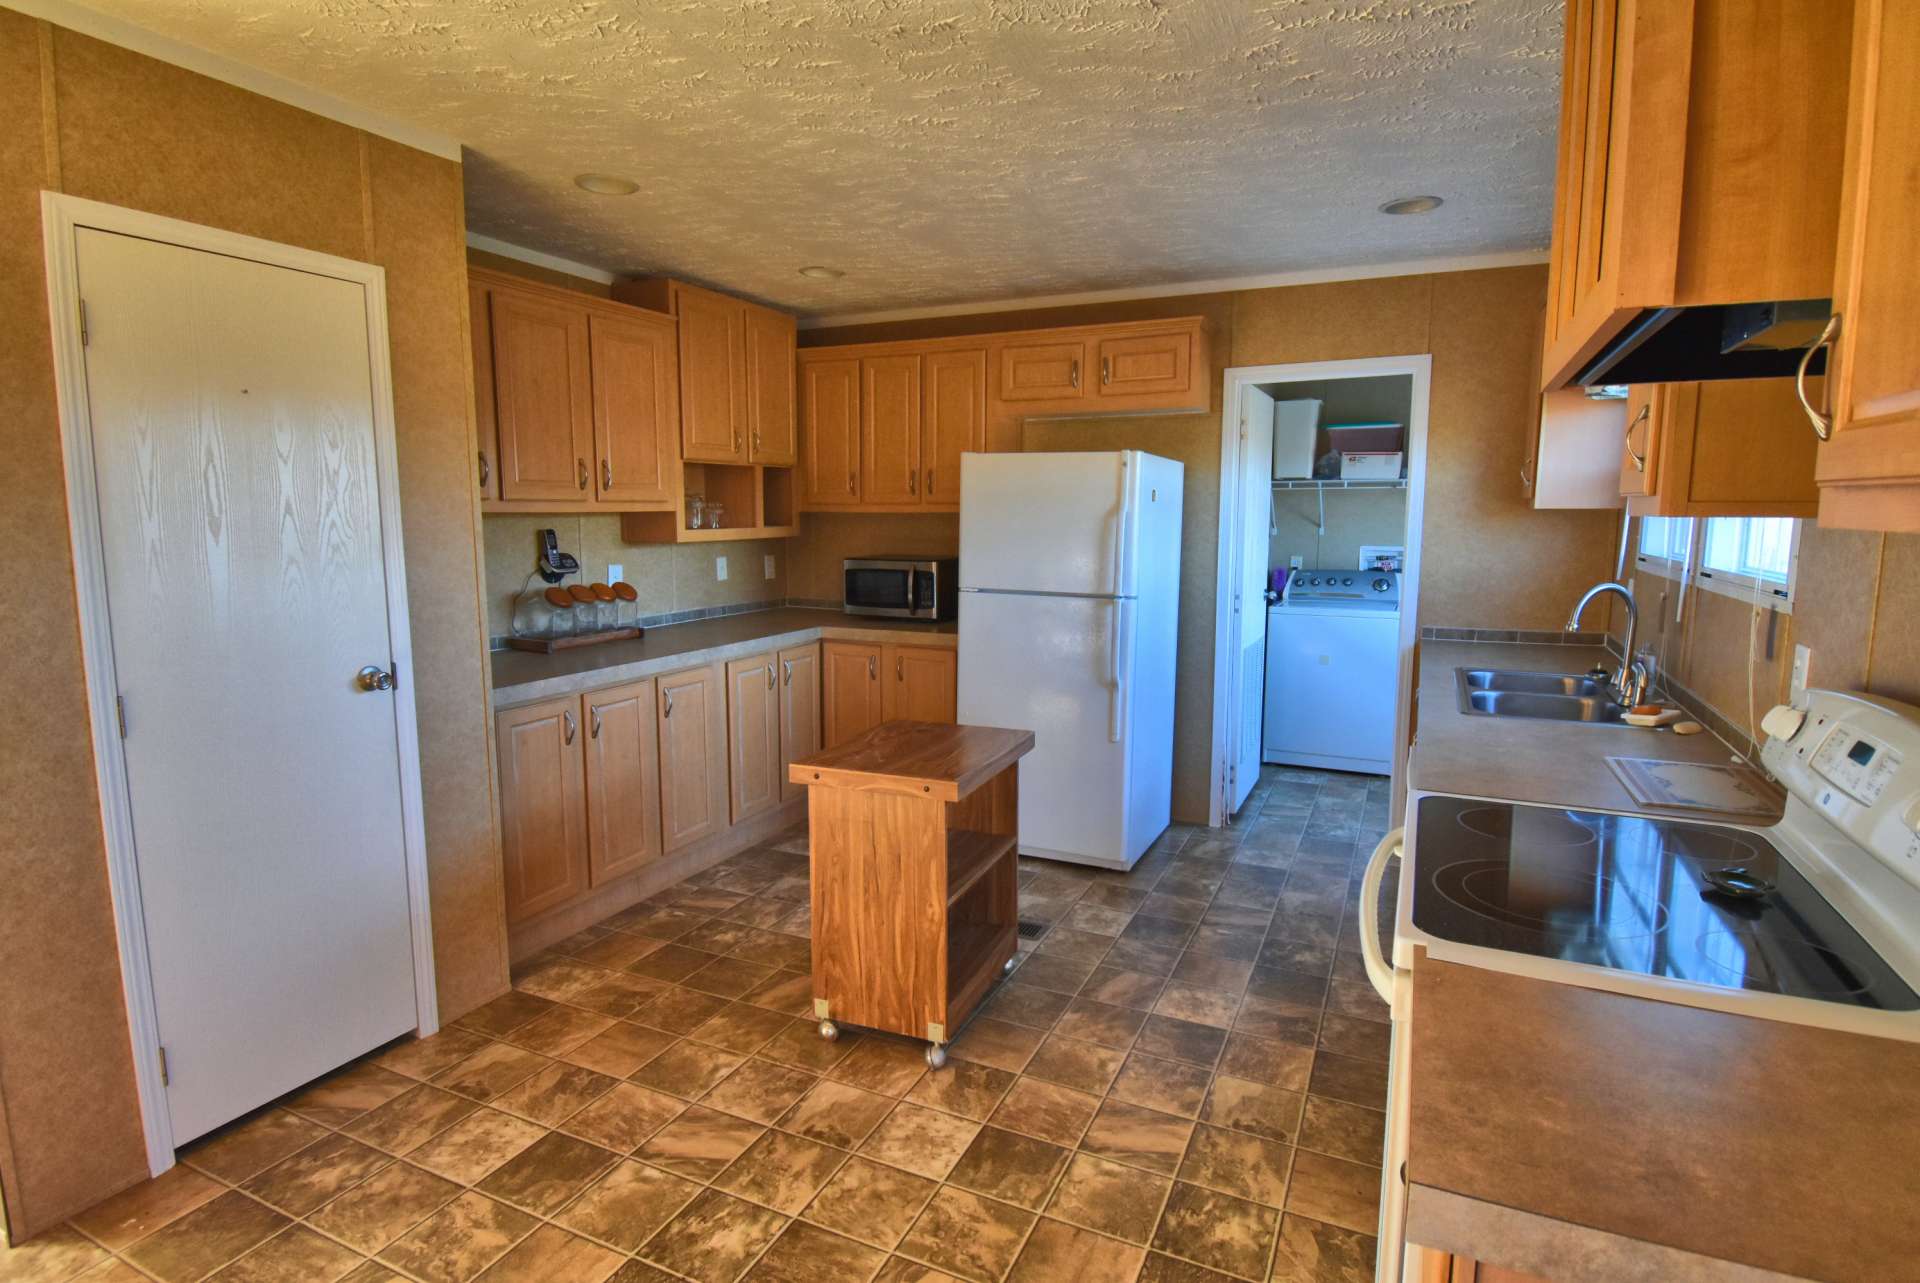 Plenty of work and storage space in the kitchen that also accesses the laundry/utility room and the back deck.